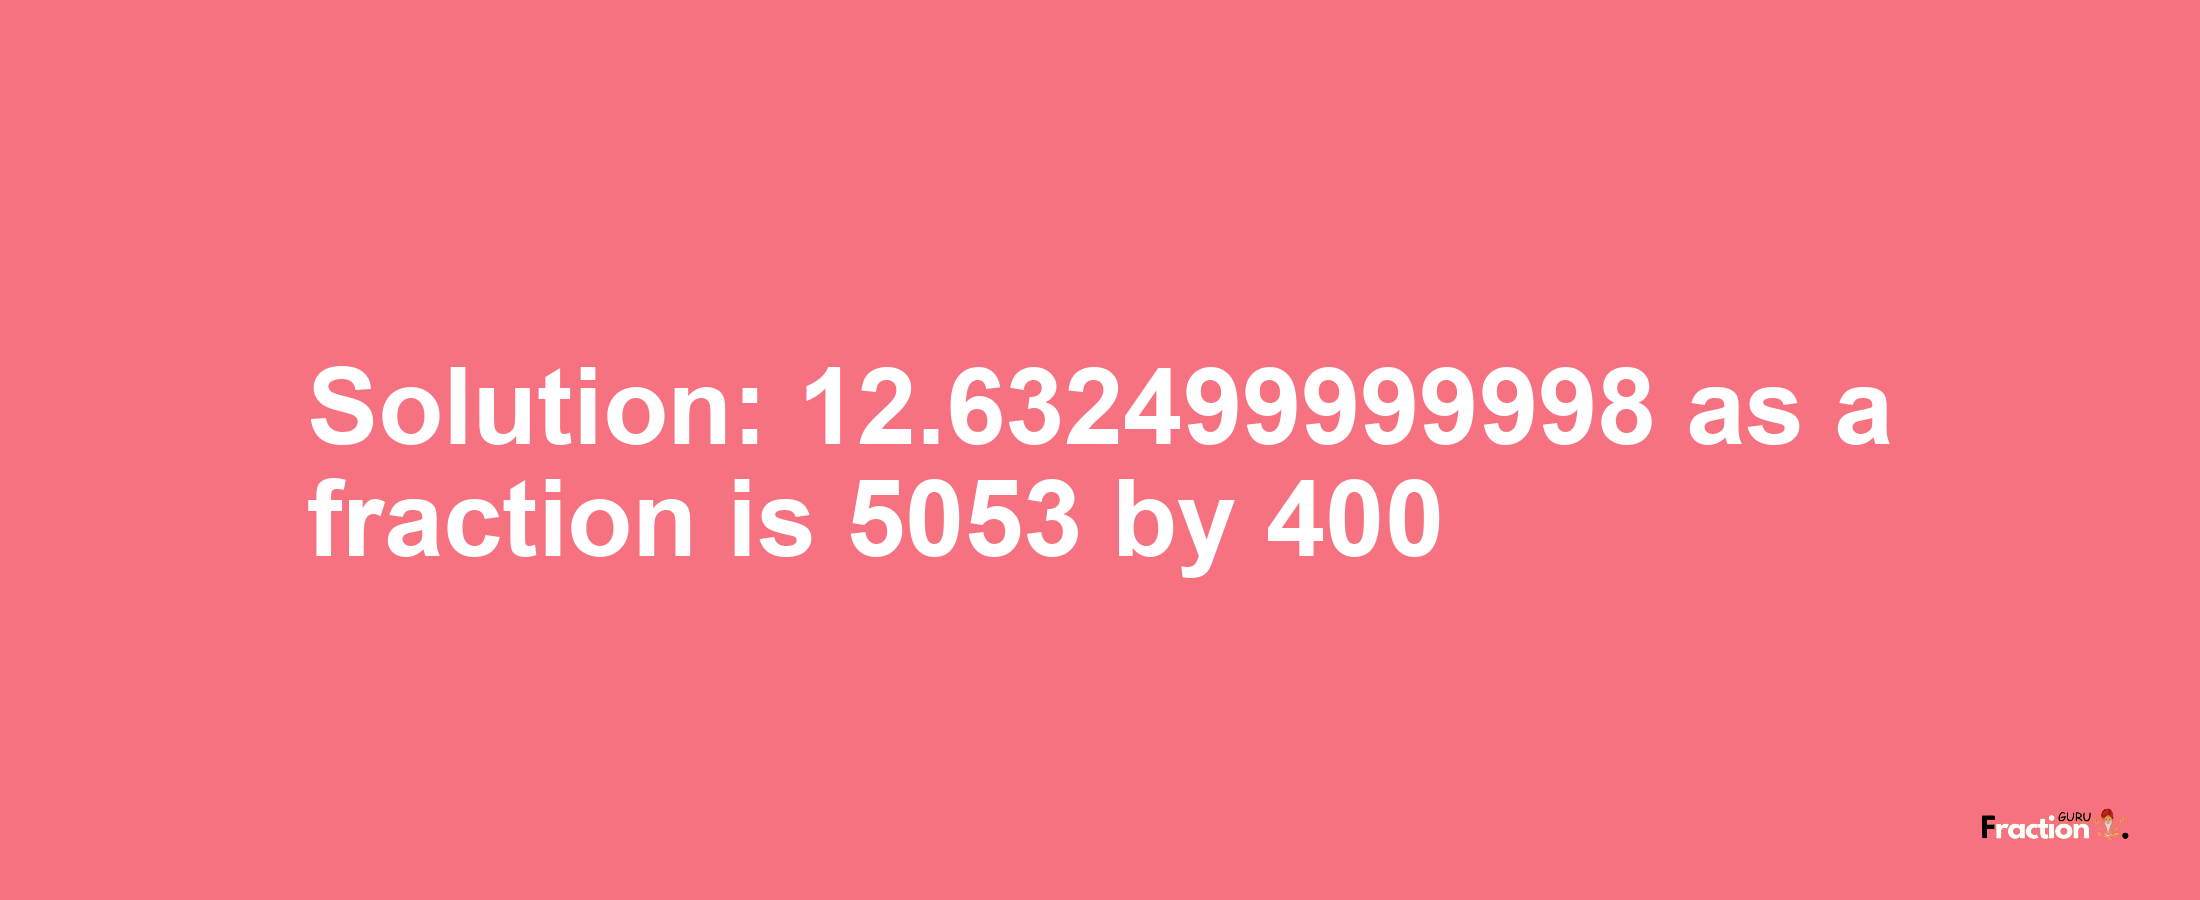 Solution:12.632499999998 as a fraction is 5053/400